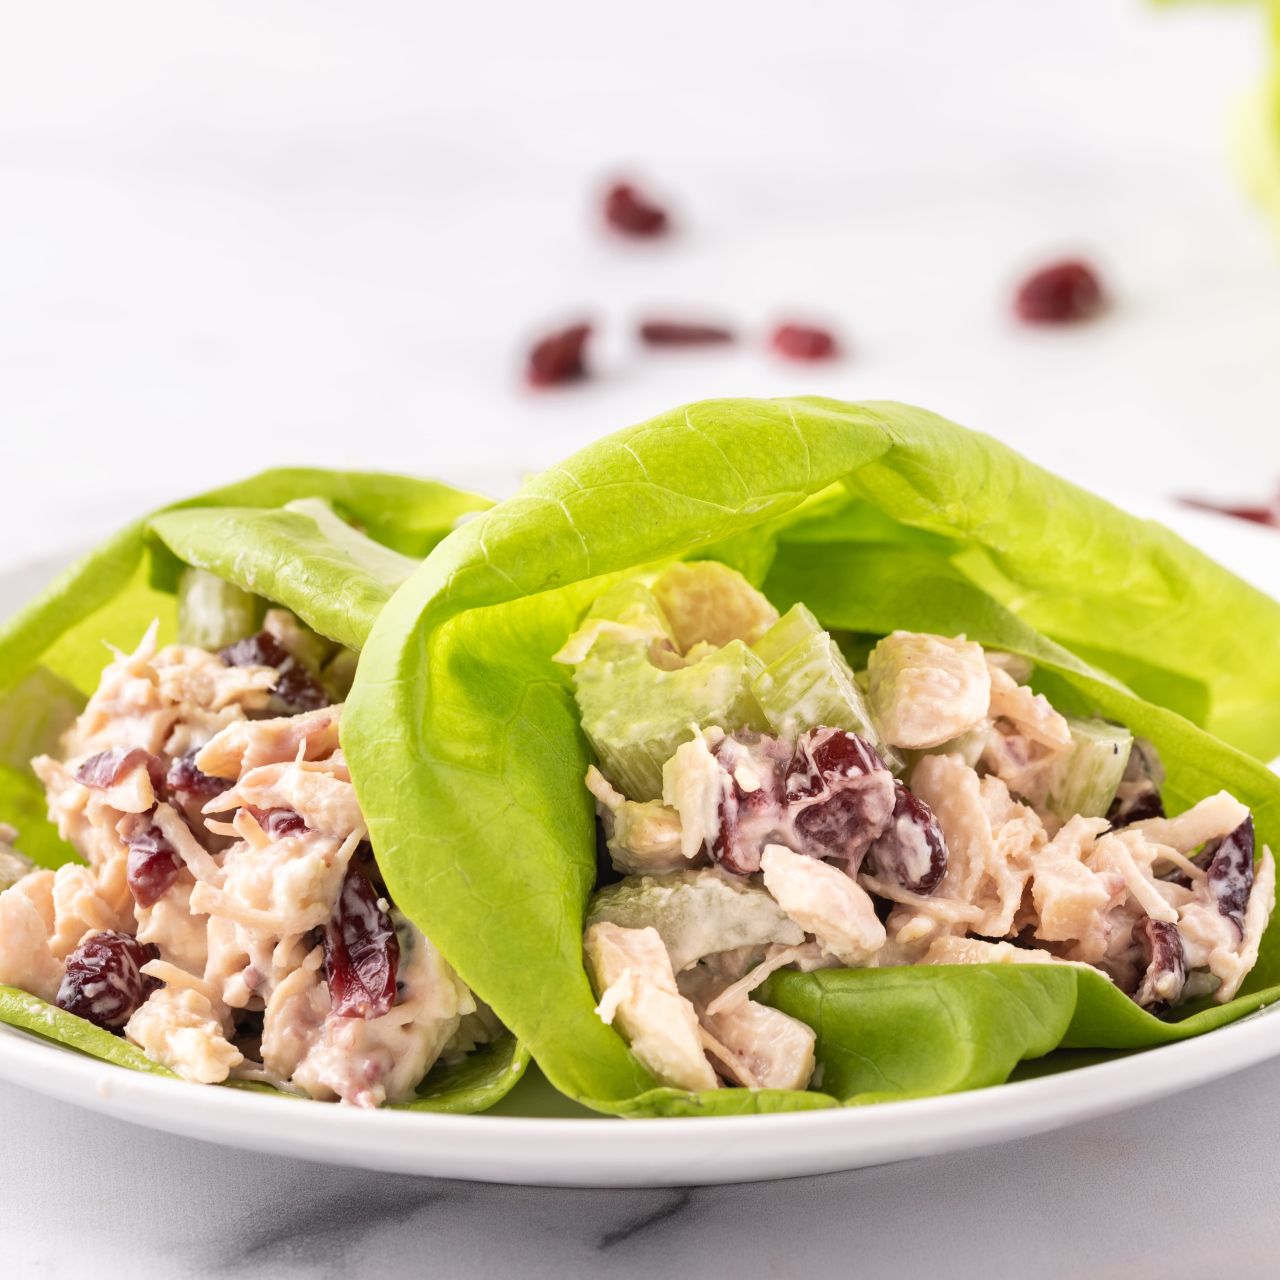 chicken salad wrapped in lettuce - Annita Beal